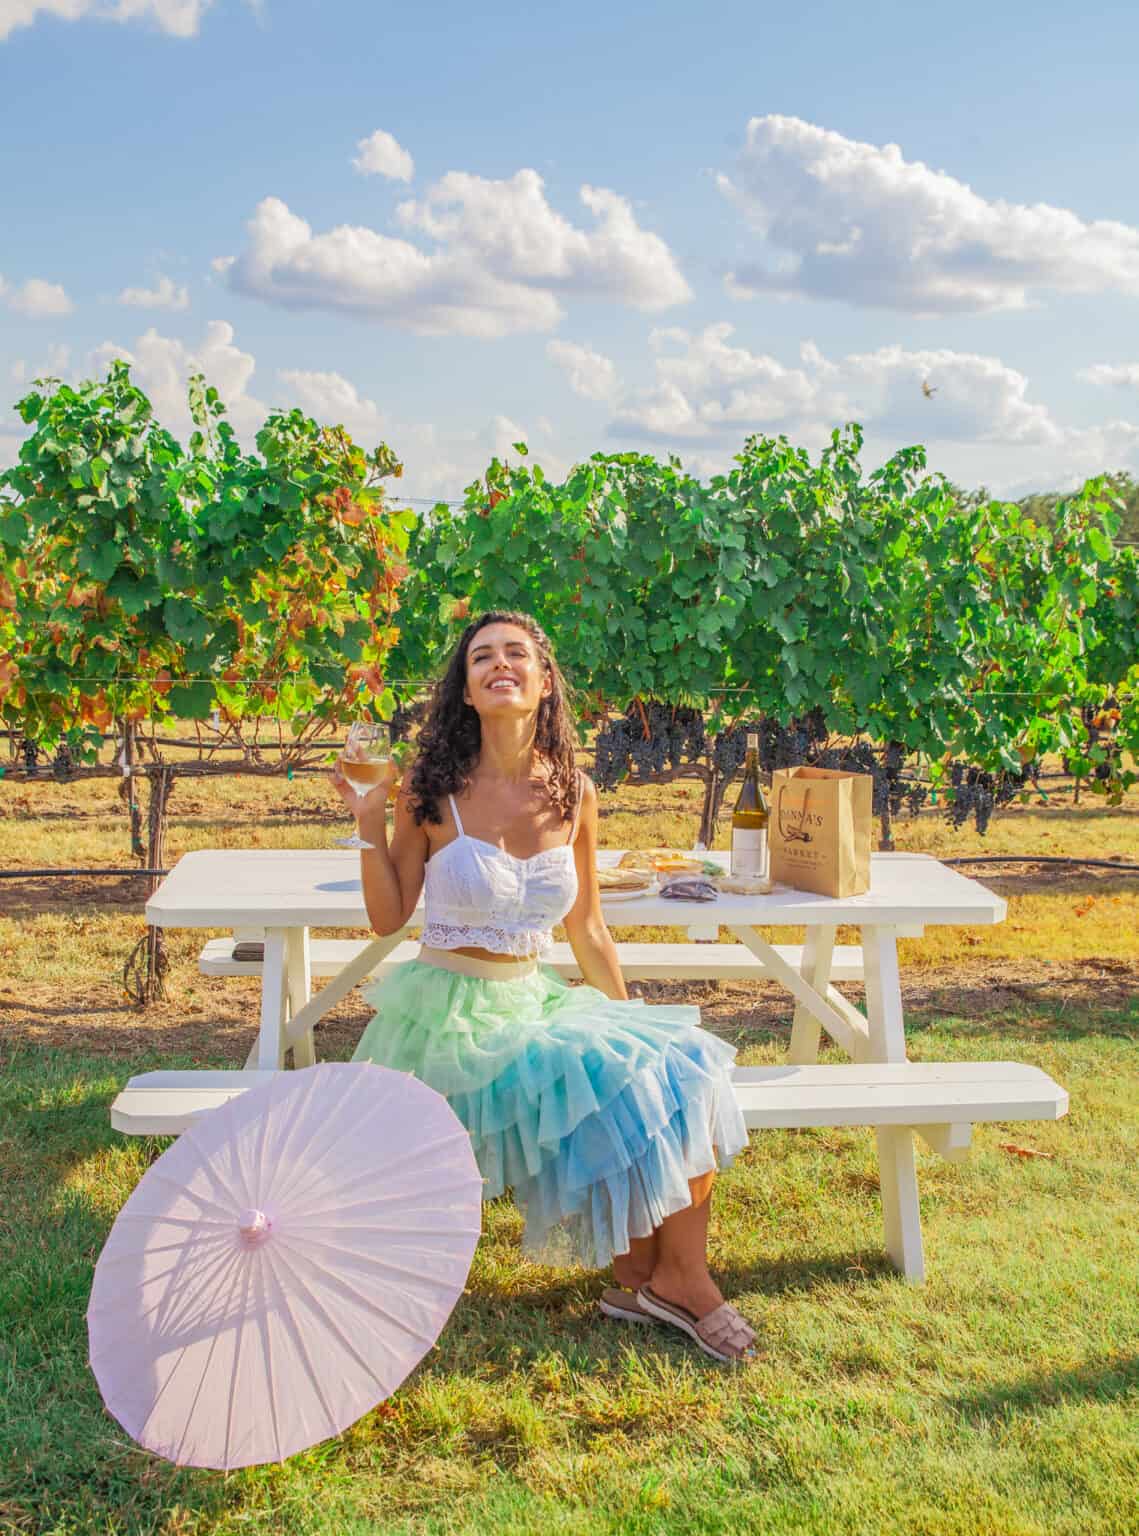 a woman sitting at a picnic table with a umbrella and a glass of wine